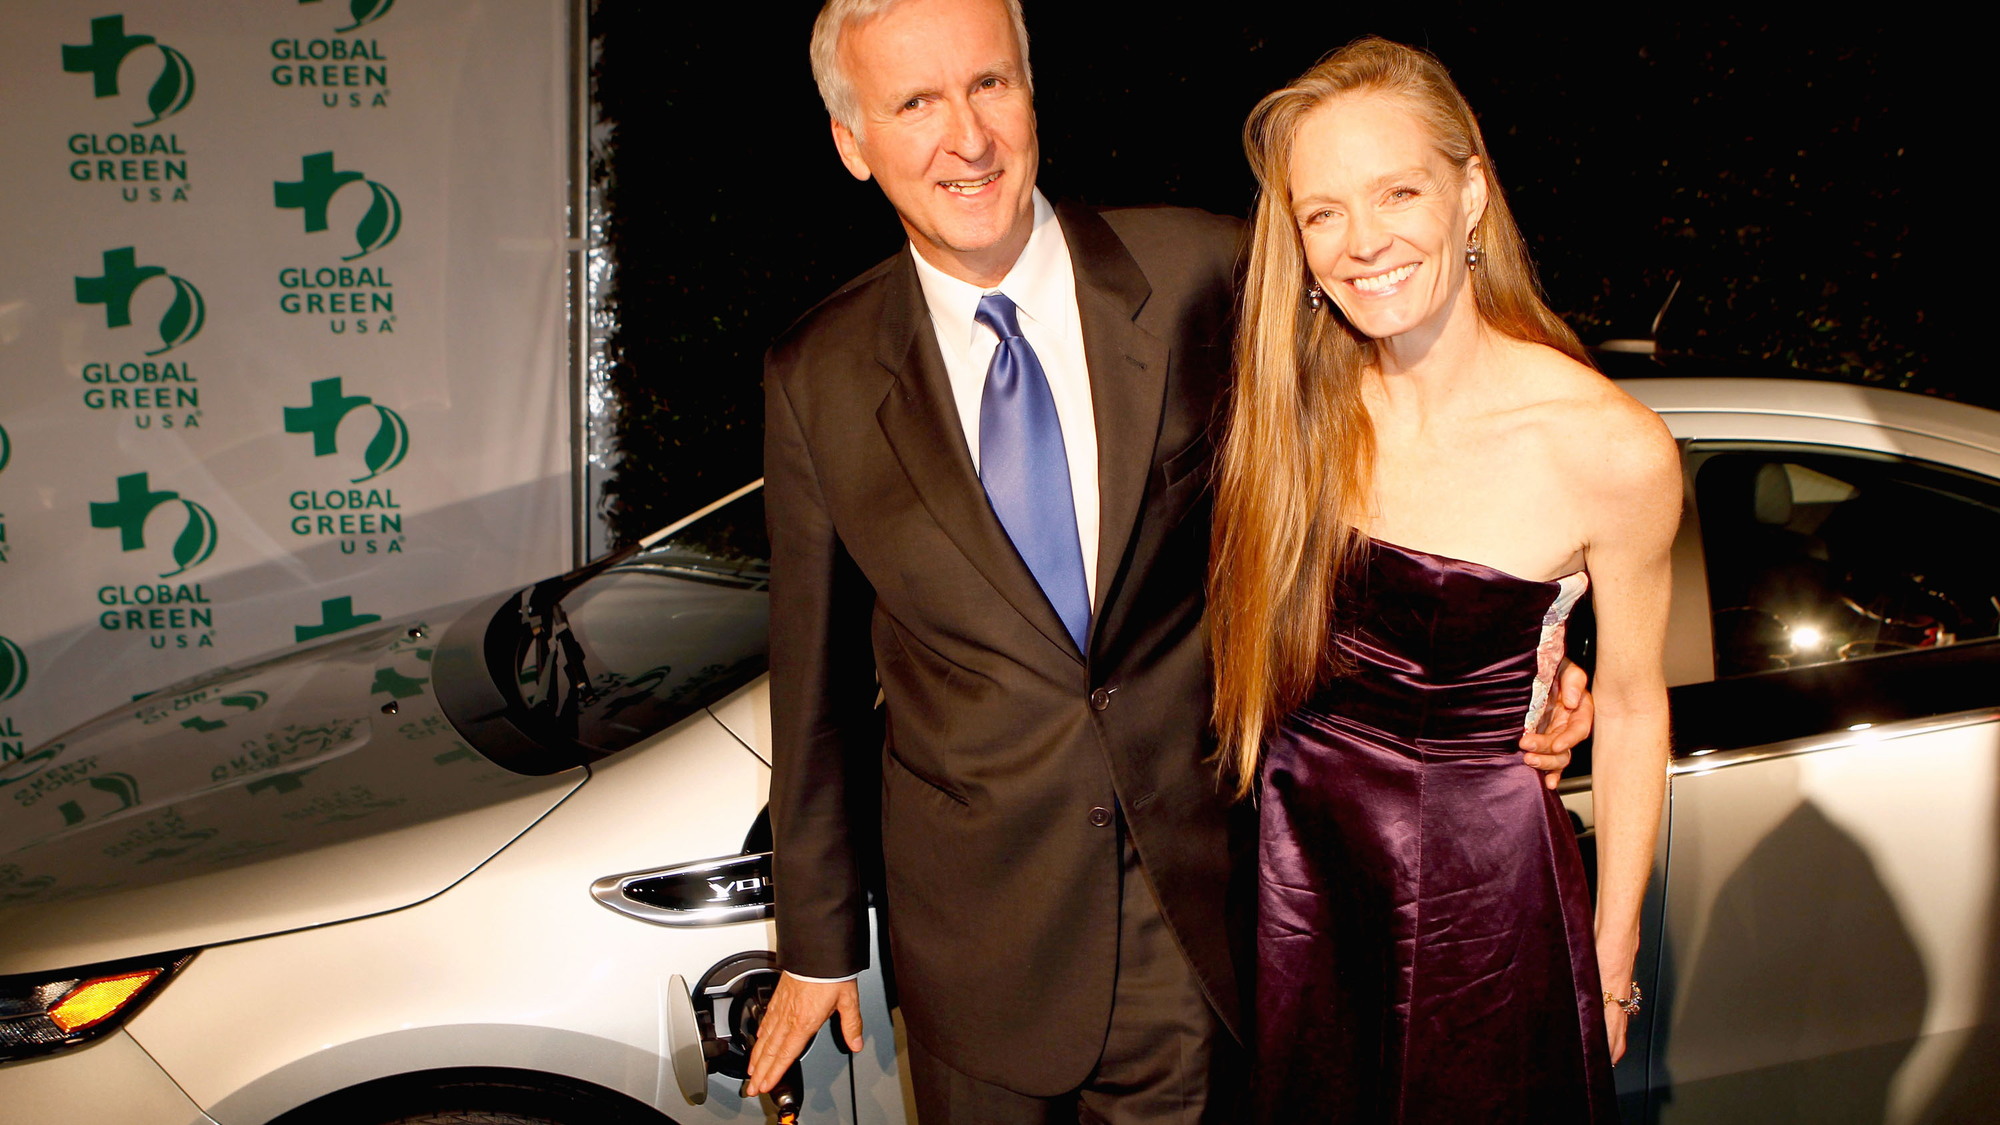 James Cameron, Suzy Amis with 2011 Chevy Volt at Global Green Pre-Oscar Party, Feb 2011